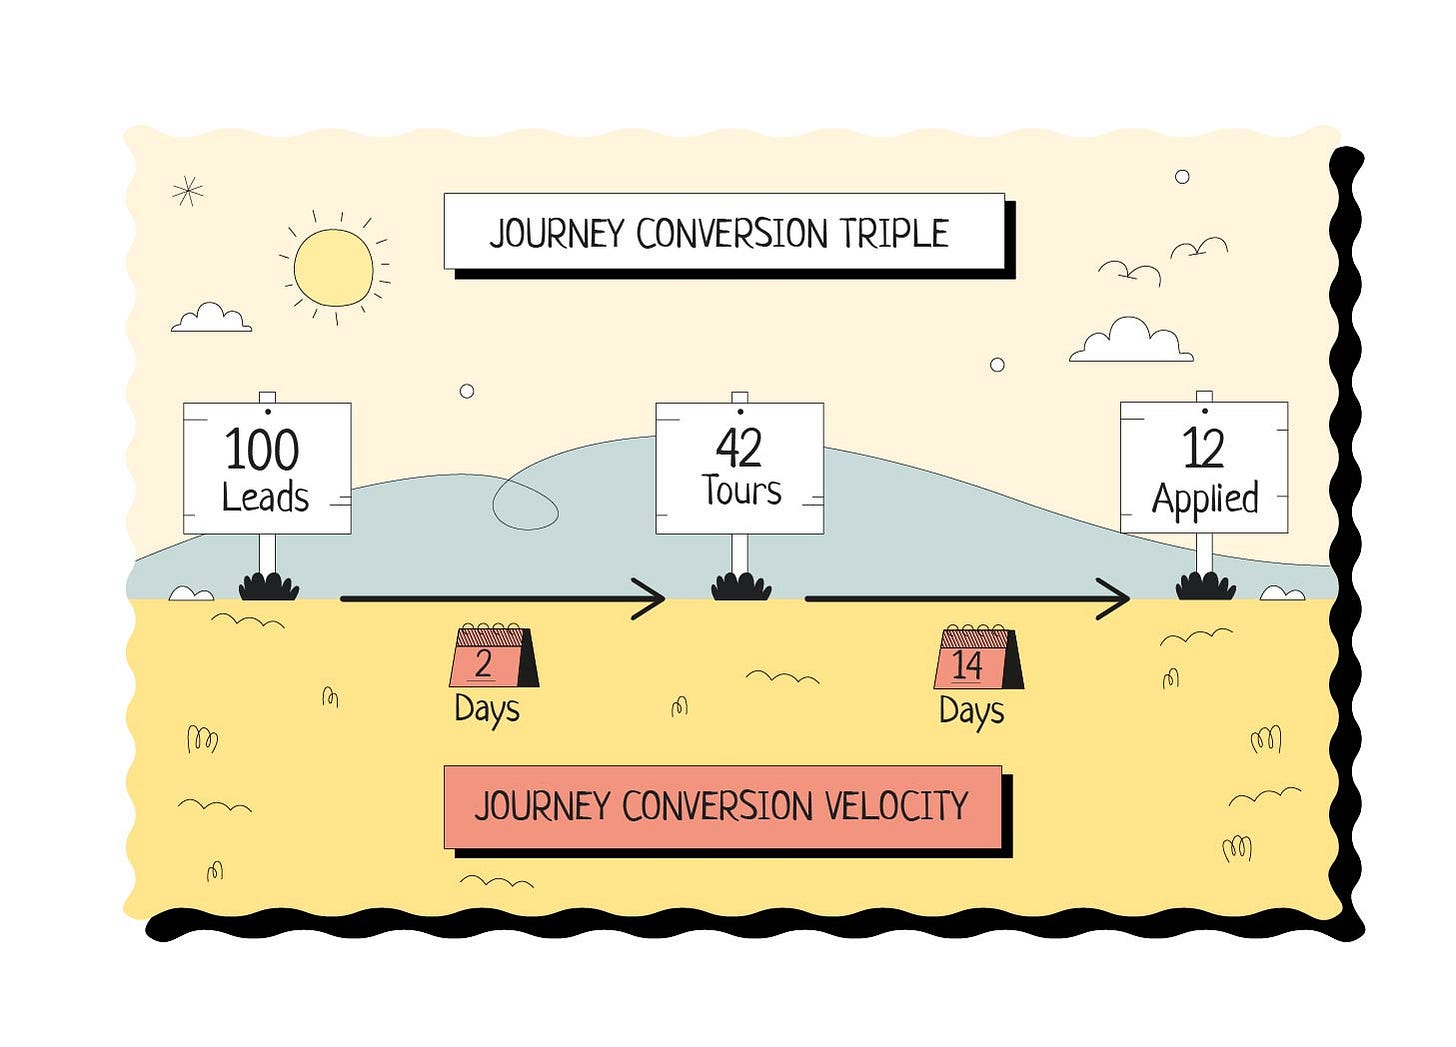 Image shows journey conversion triple and velocity on a path which begins from 100 leads that takes 2 days to get converted into 42 tours which take 14 days to get converted into 12 applications